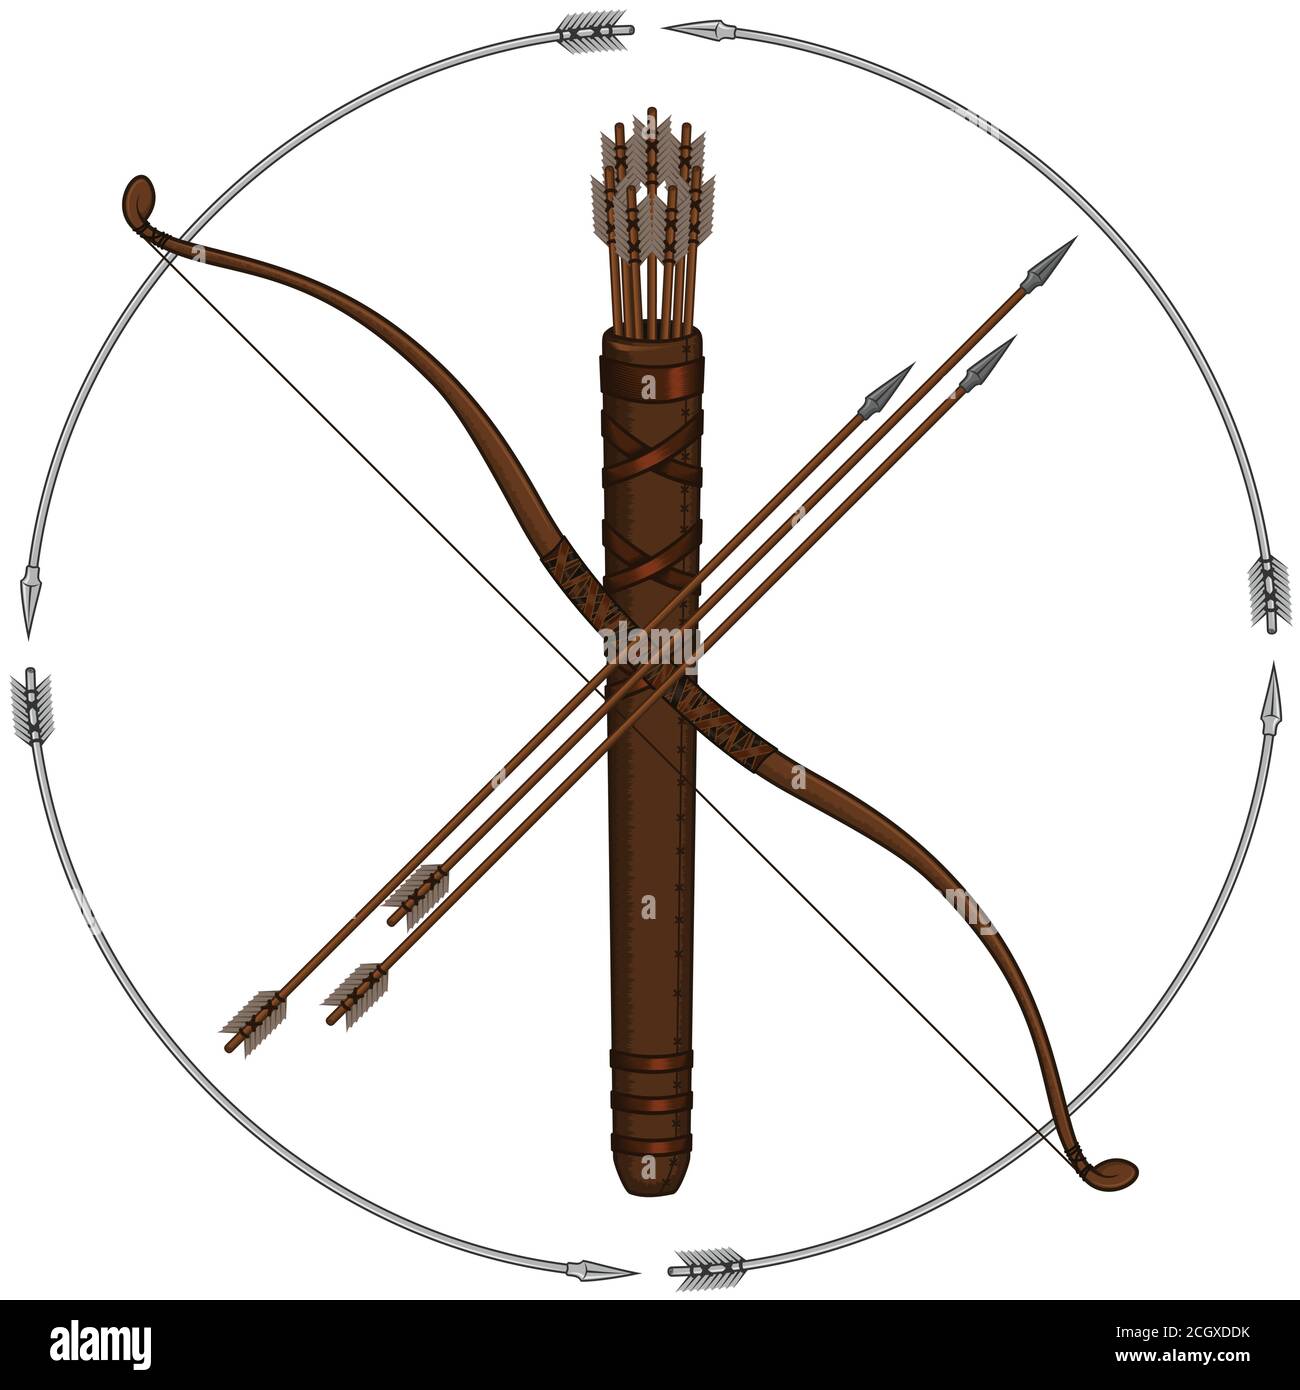 Vector design of Bow Arrow Quiver Archery Kit on white background, each element is individual Stock Vector